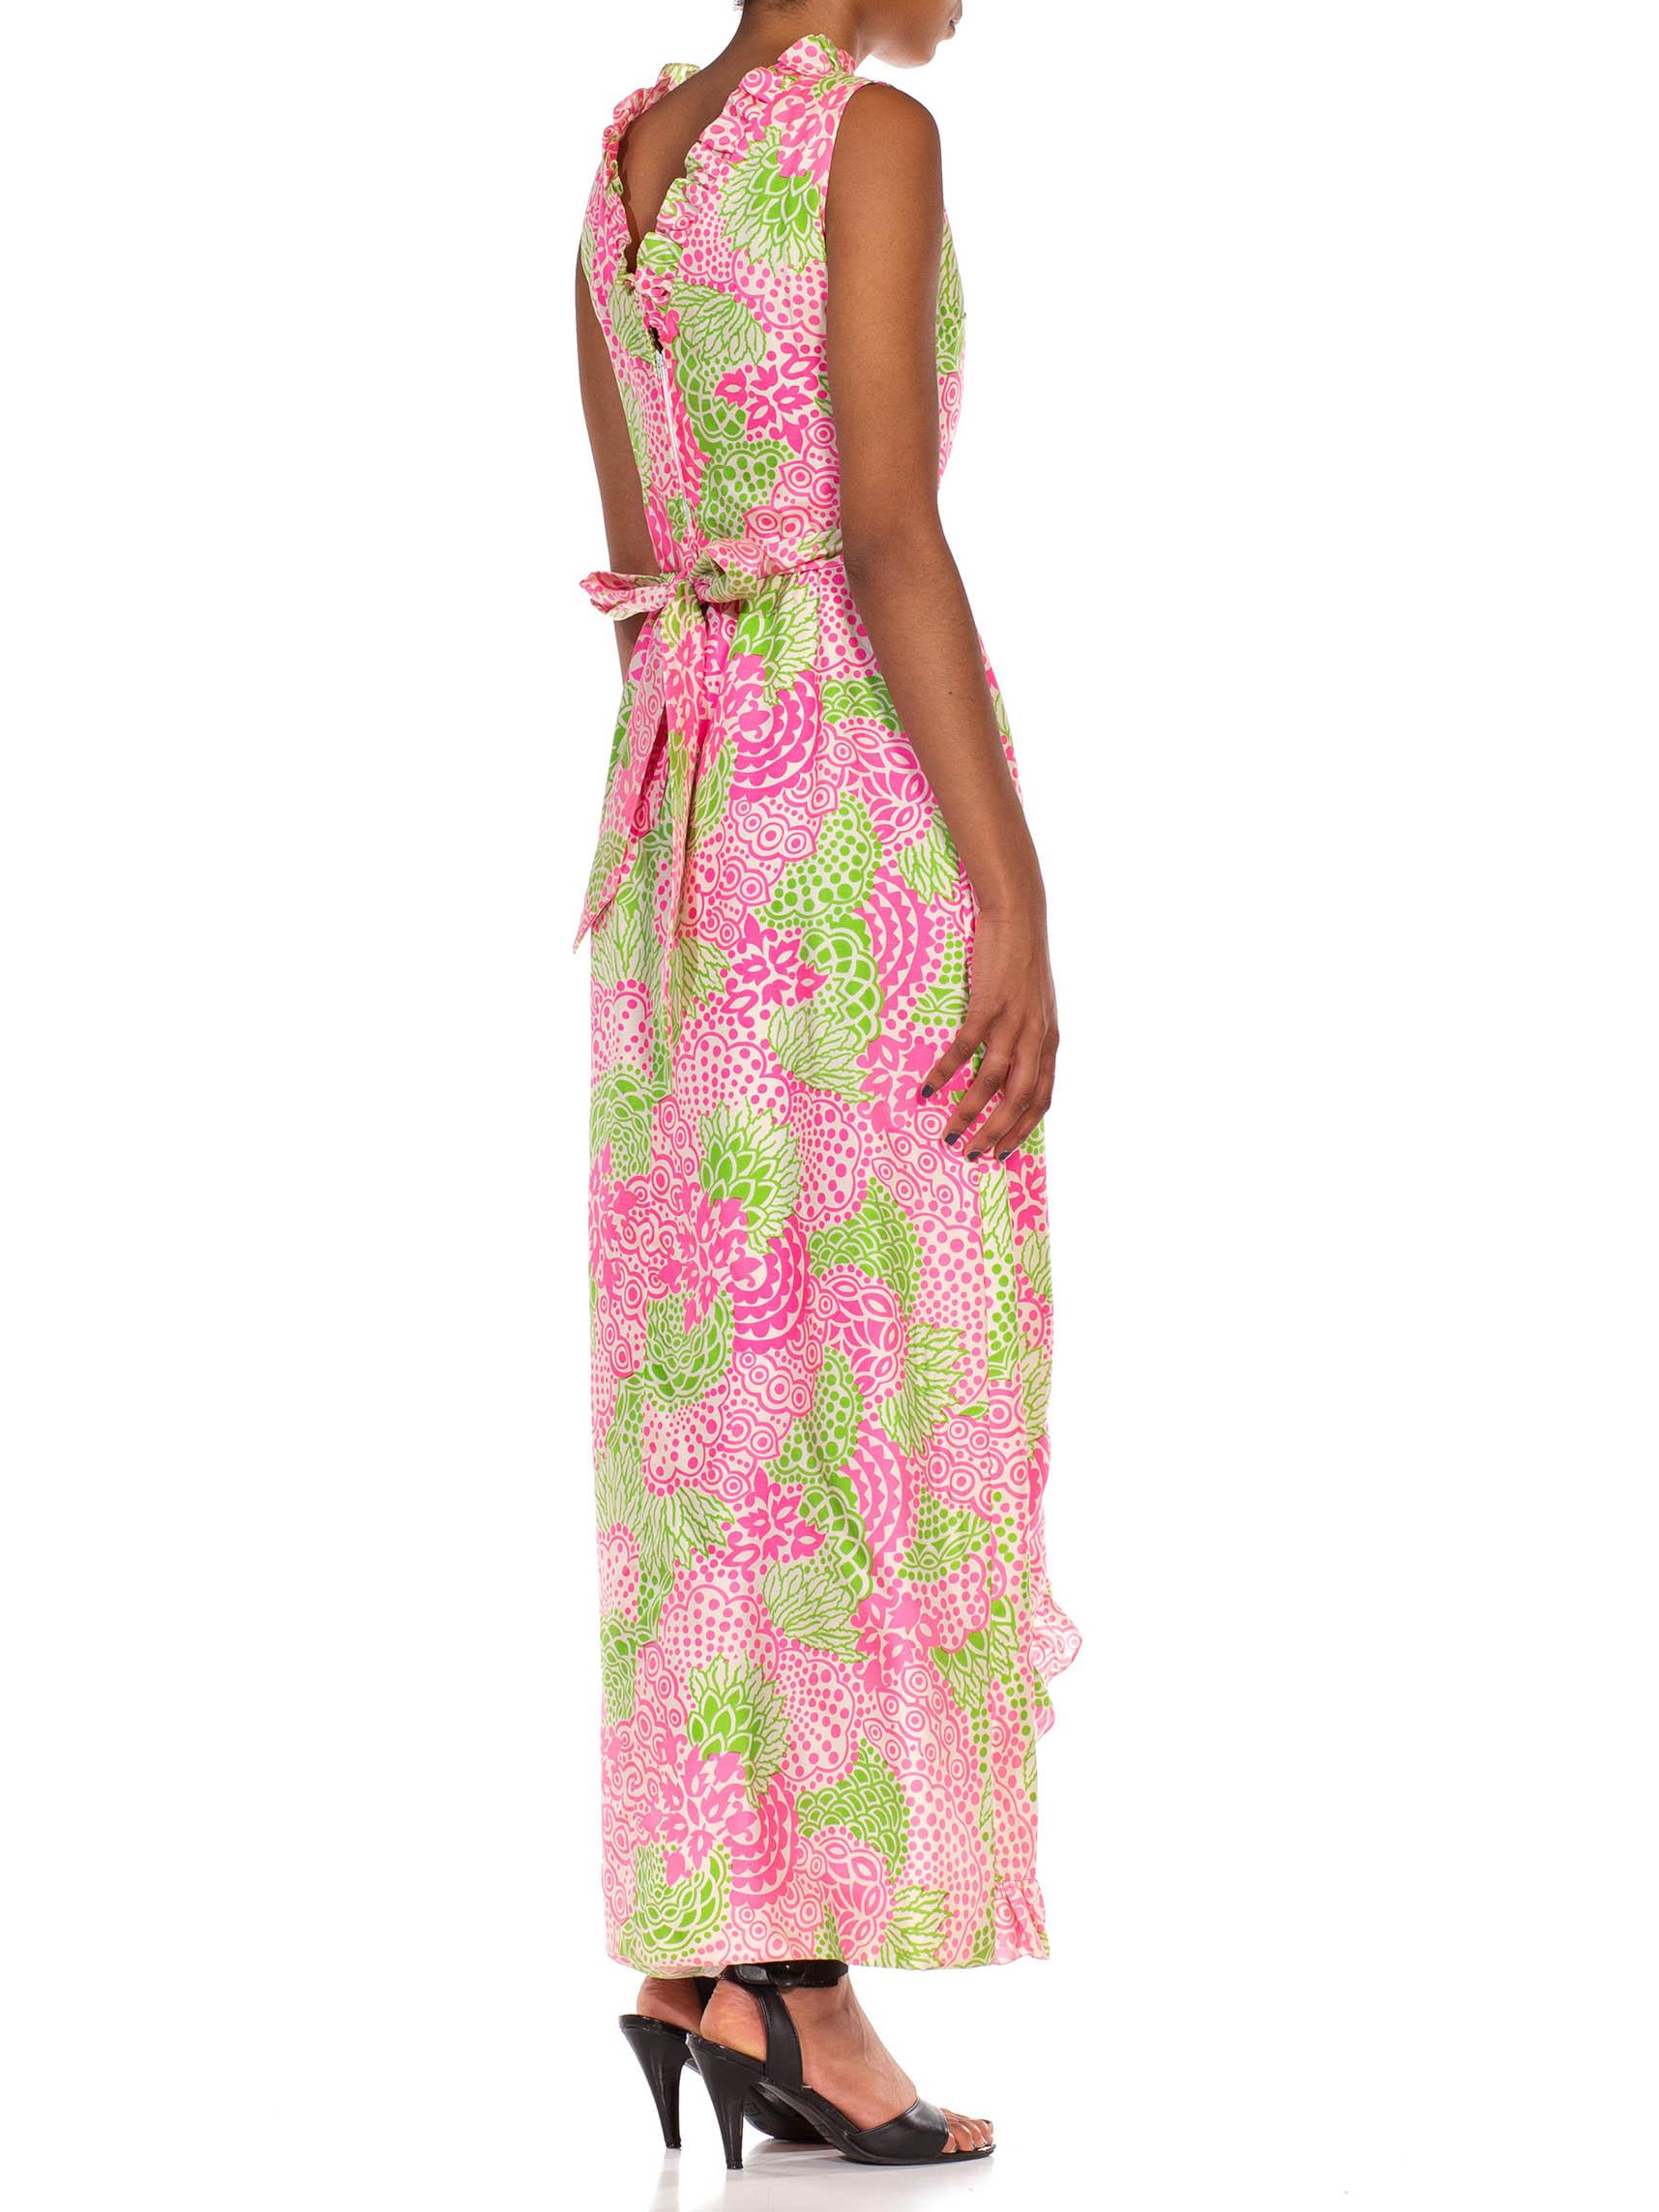 1960S LILLY PULITZER Style Pink & Green Cotton Sleeveless Maxi Dress  For Sale 1